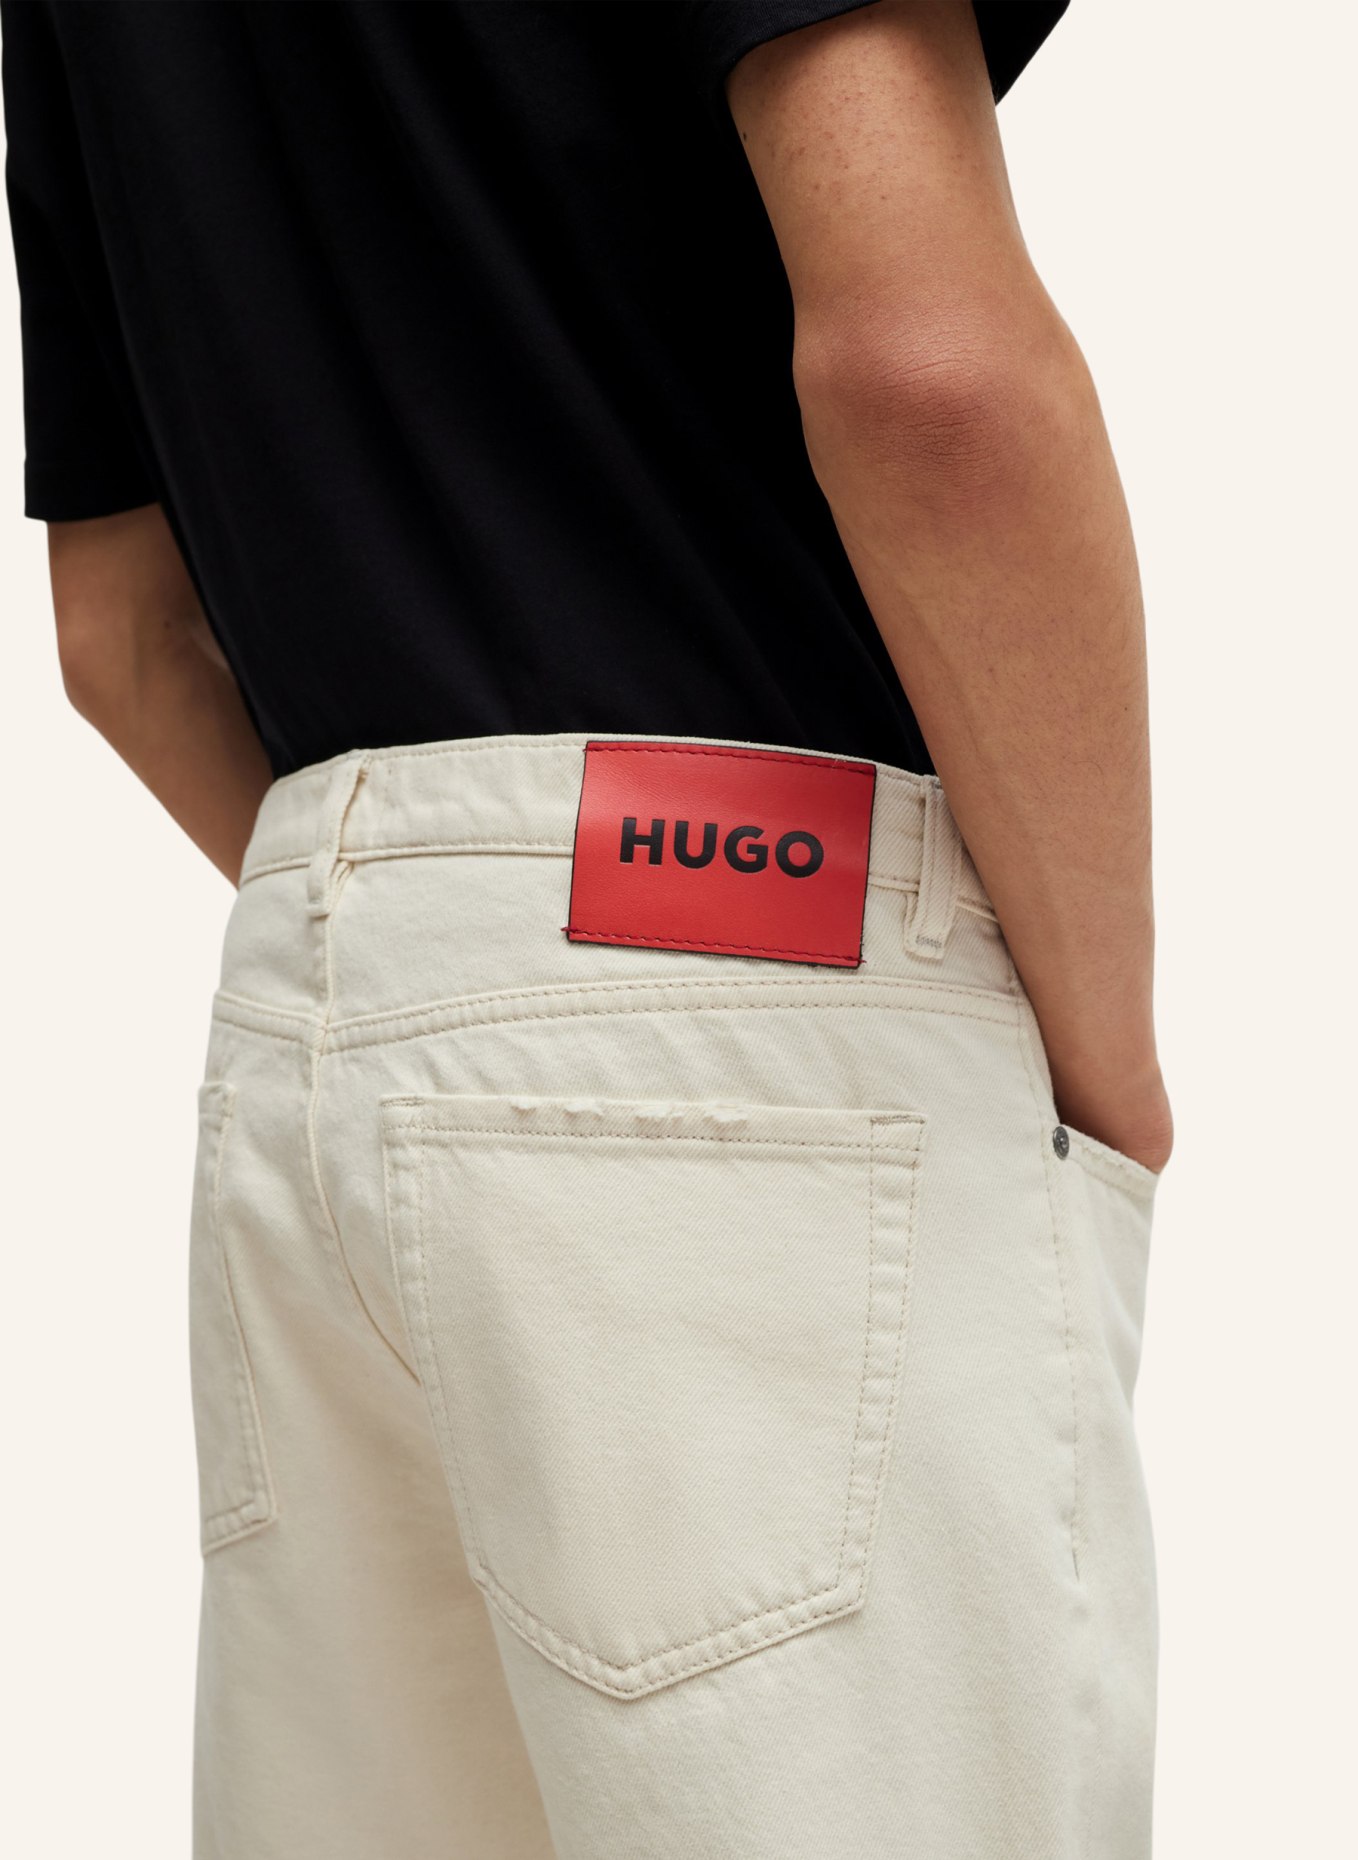 HUGO Jeans HUGO 634 Tapered Fit, Farbe: WEISS (Bild 4)